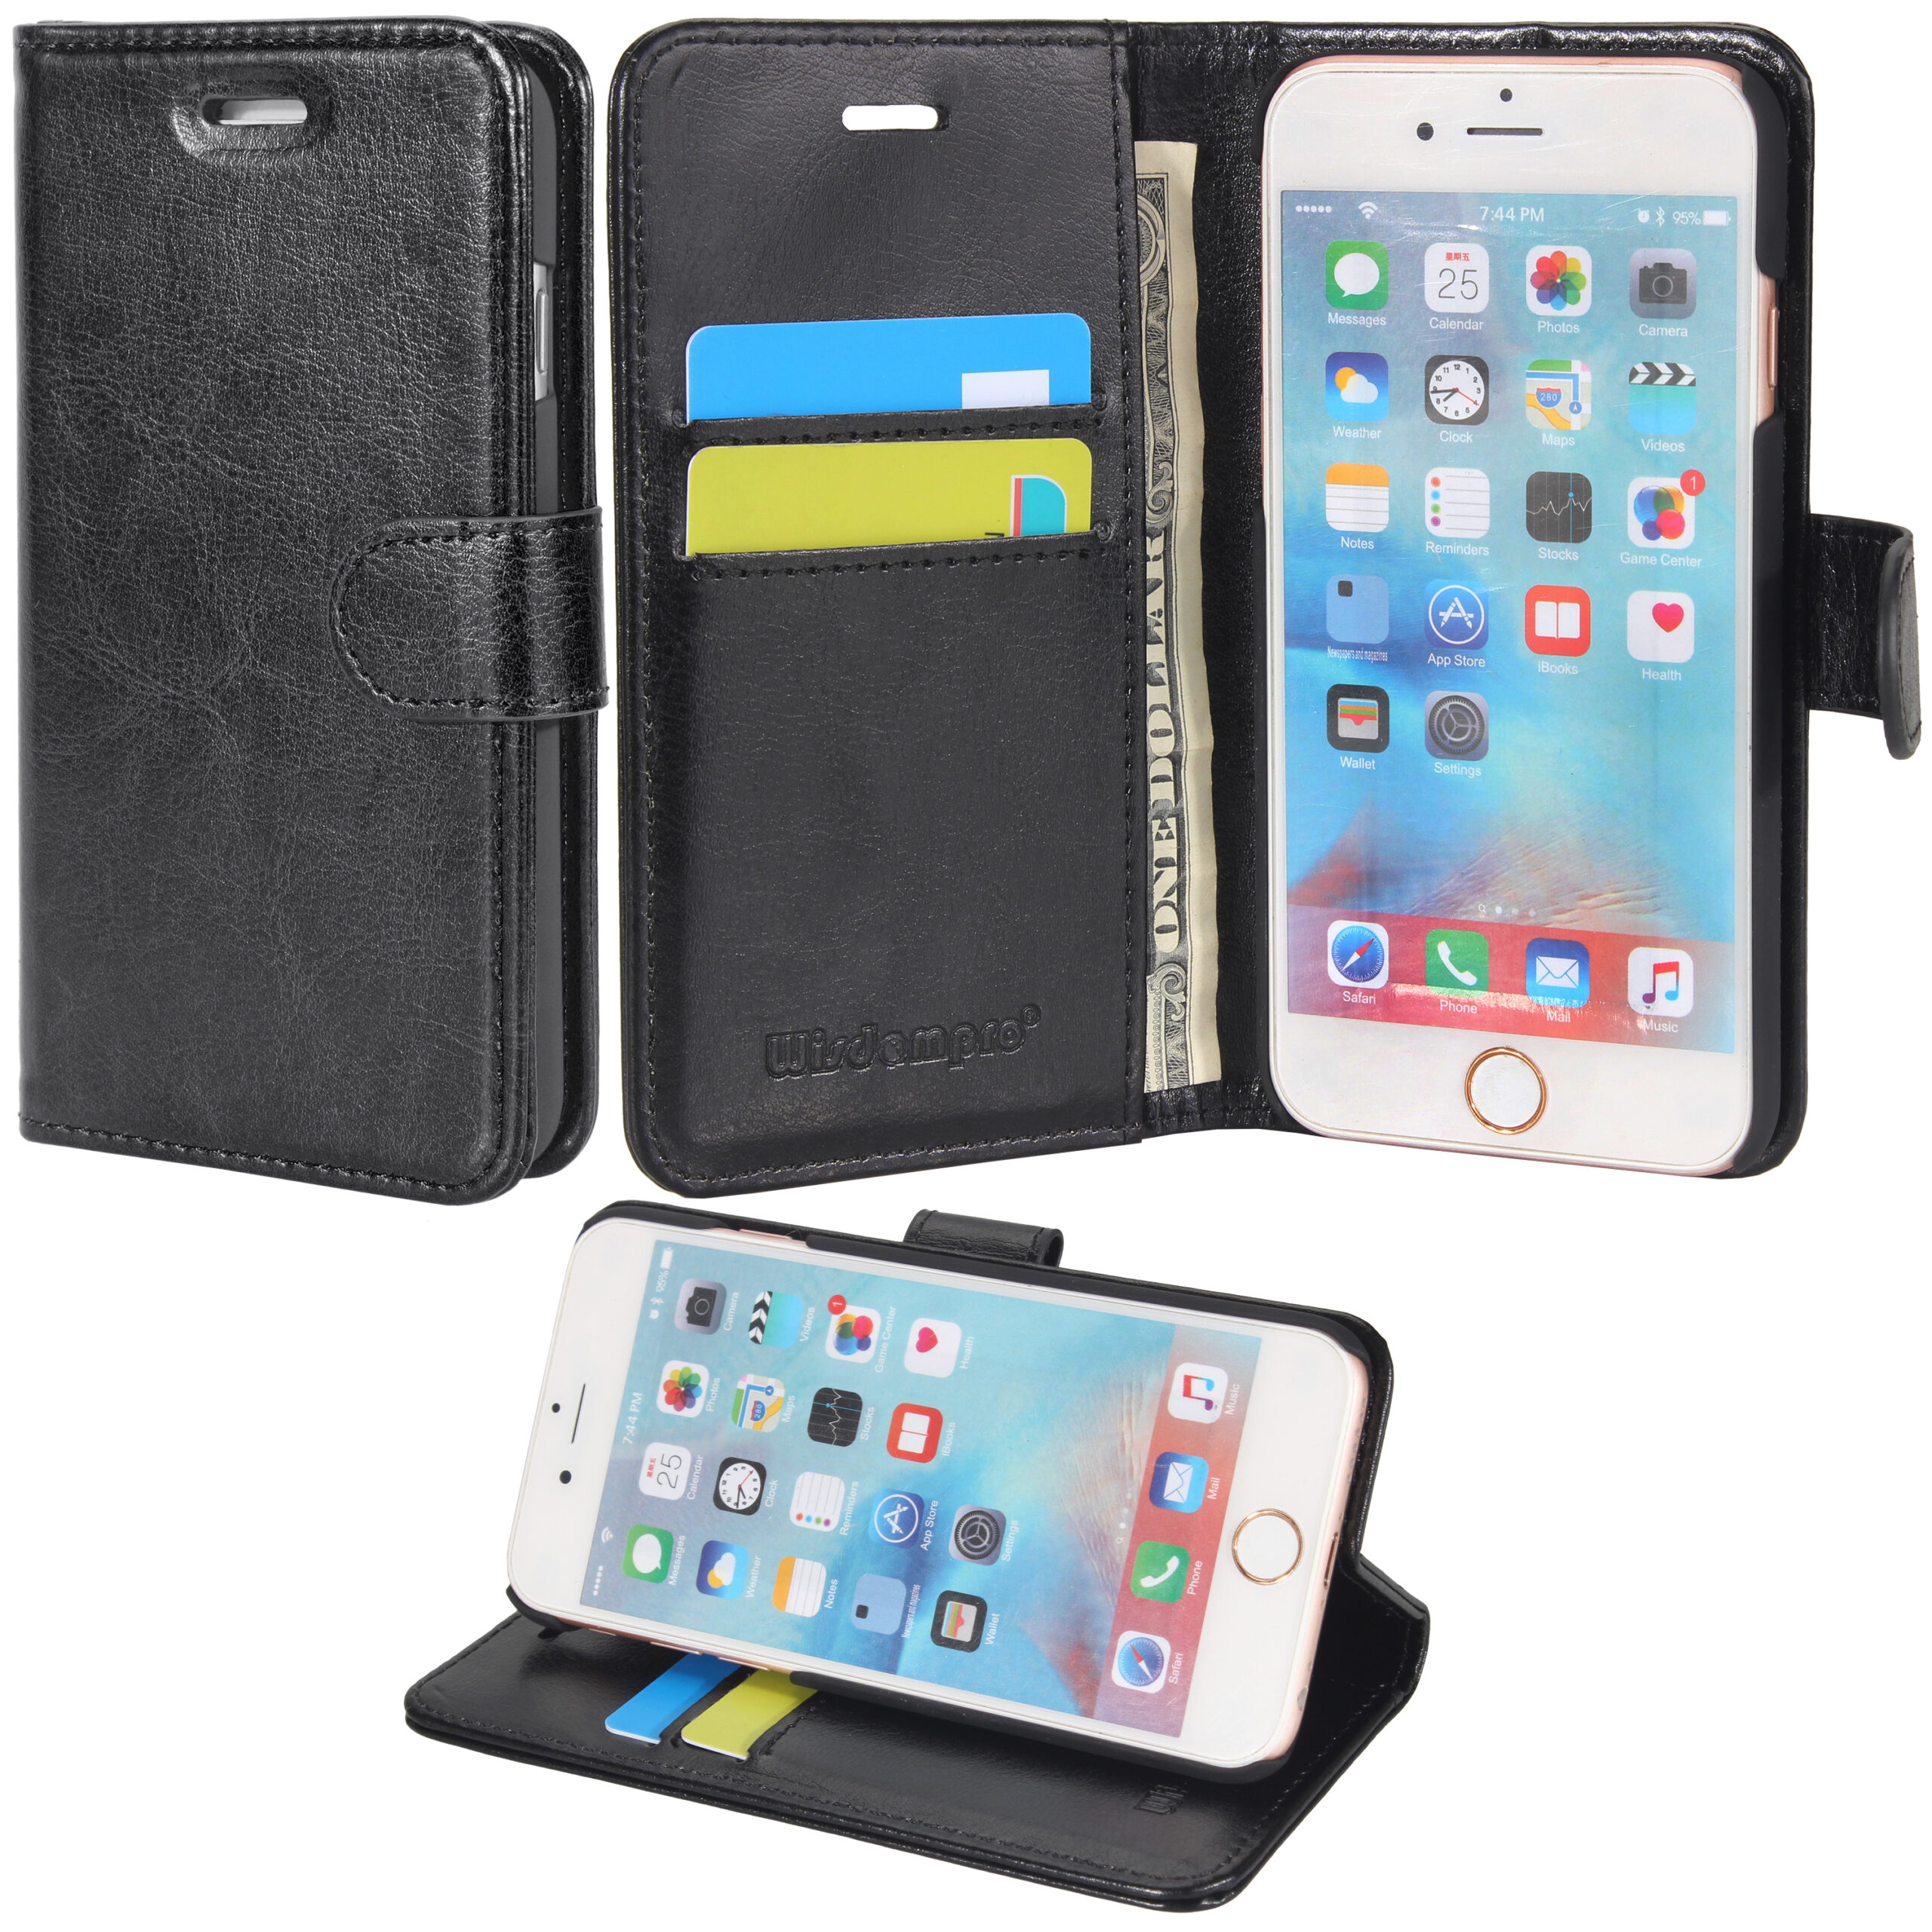 Protective Leather Case For Apple iPhone 6s Plus 5.5inch